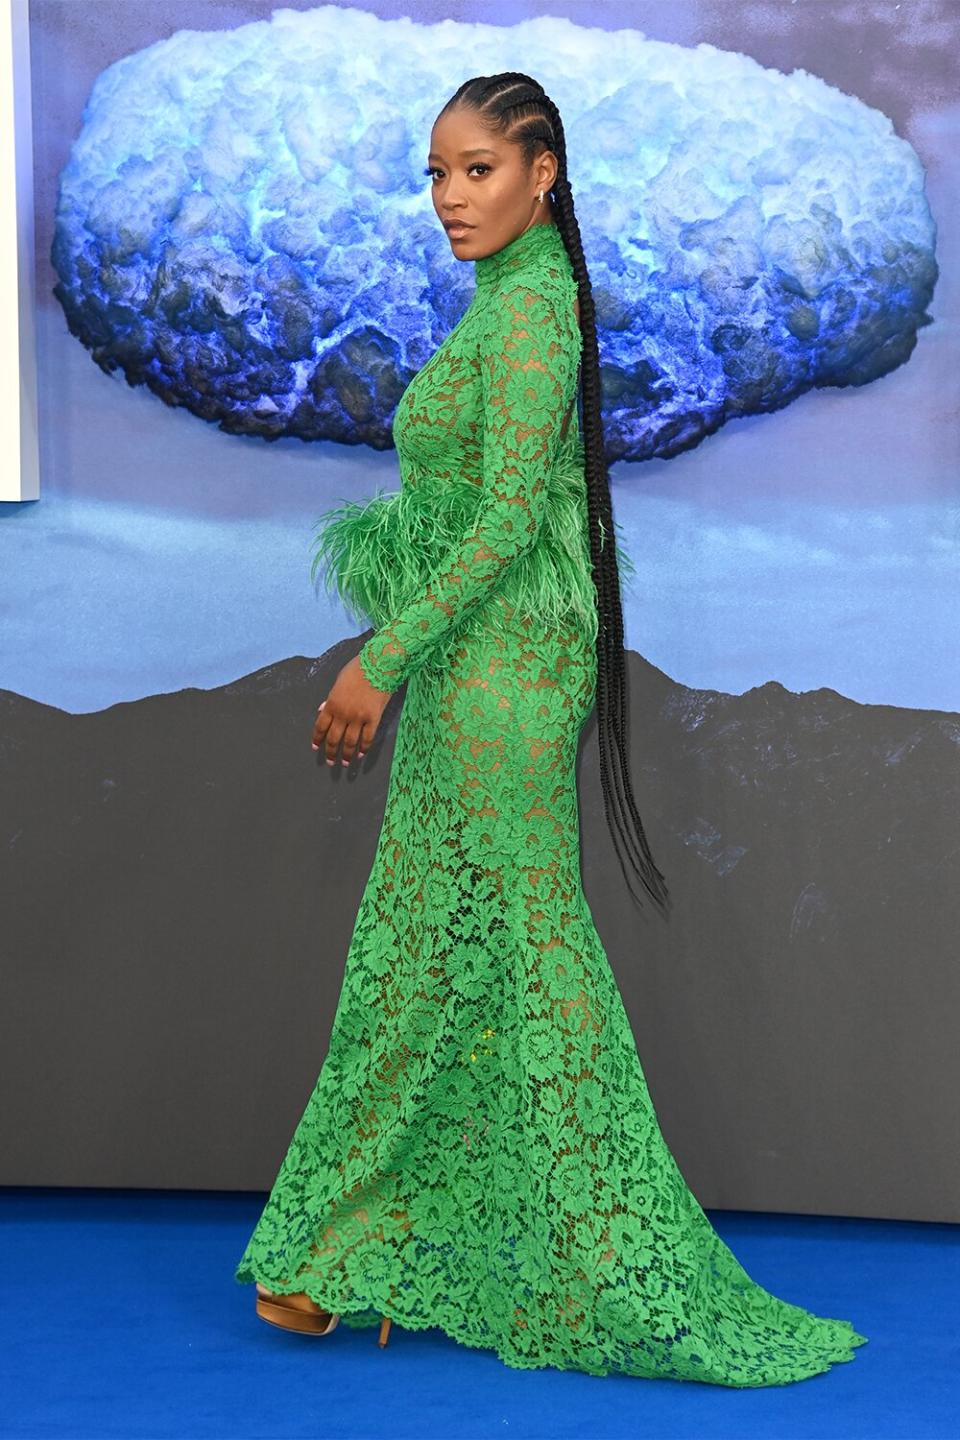 Keke Palmer attends the UK Premiere Of "NOPE" at the Odeon Luxe Leicester Square on July 28, 2022 in London, England.